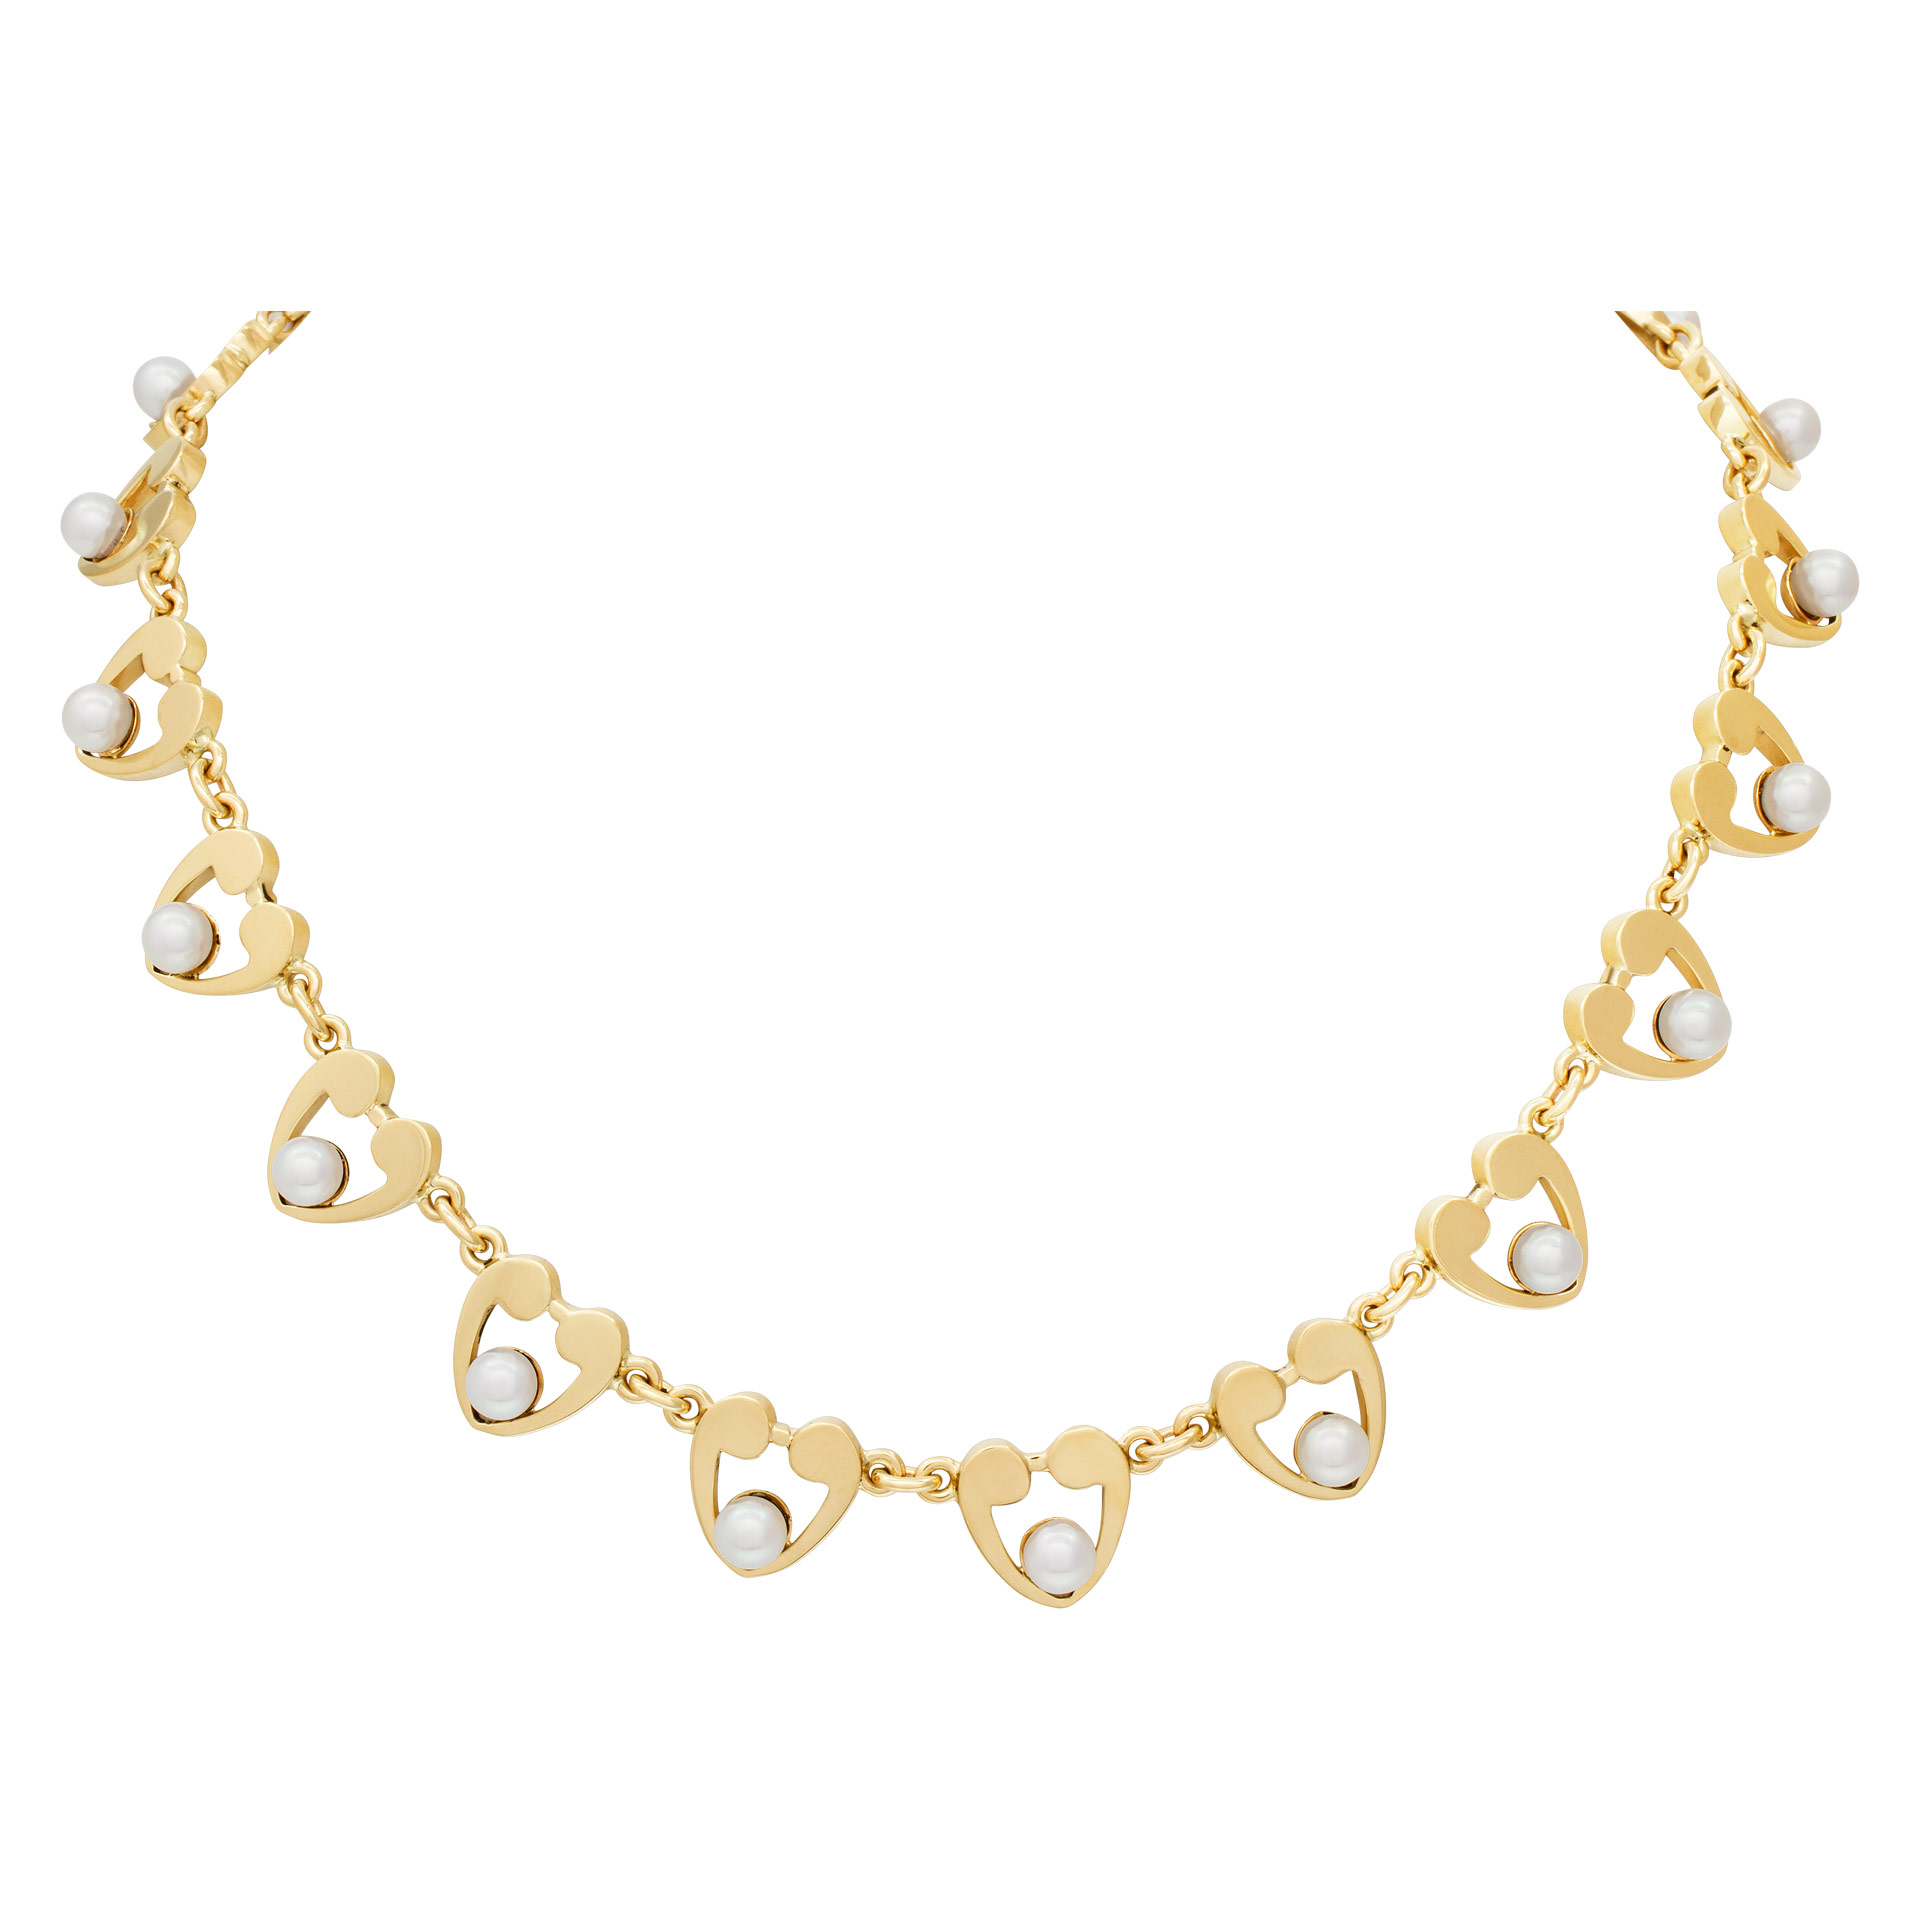 Cultured pearls (5x5.5mm) and sytlish heart design necklace in soild 14k yelllow gold. Choker necklace length: 15''.